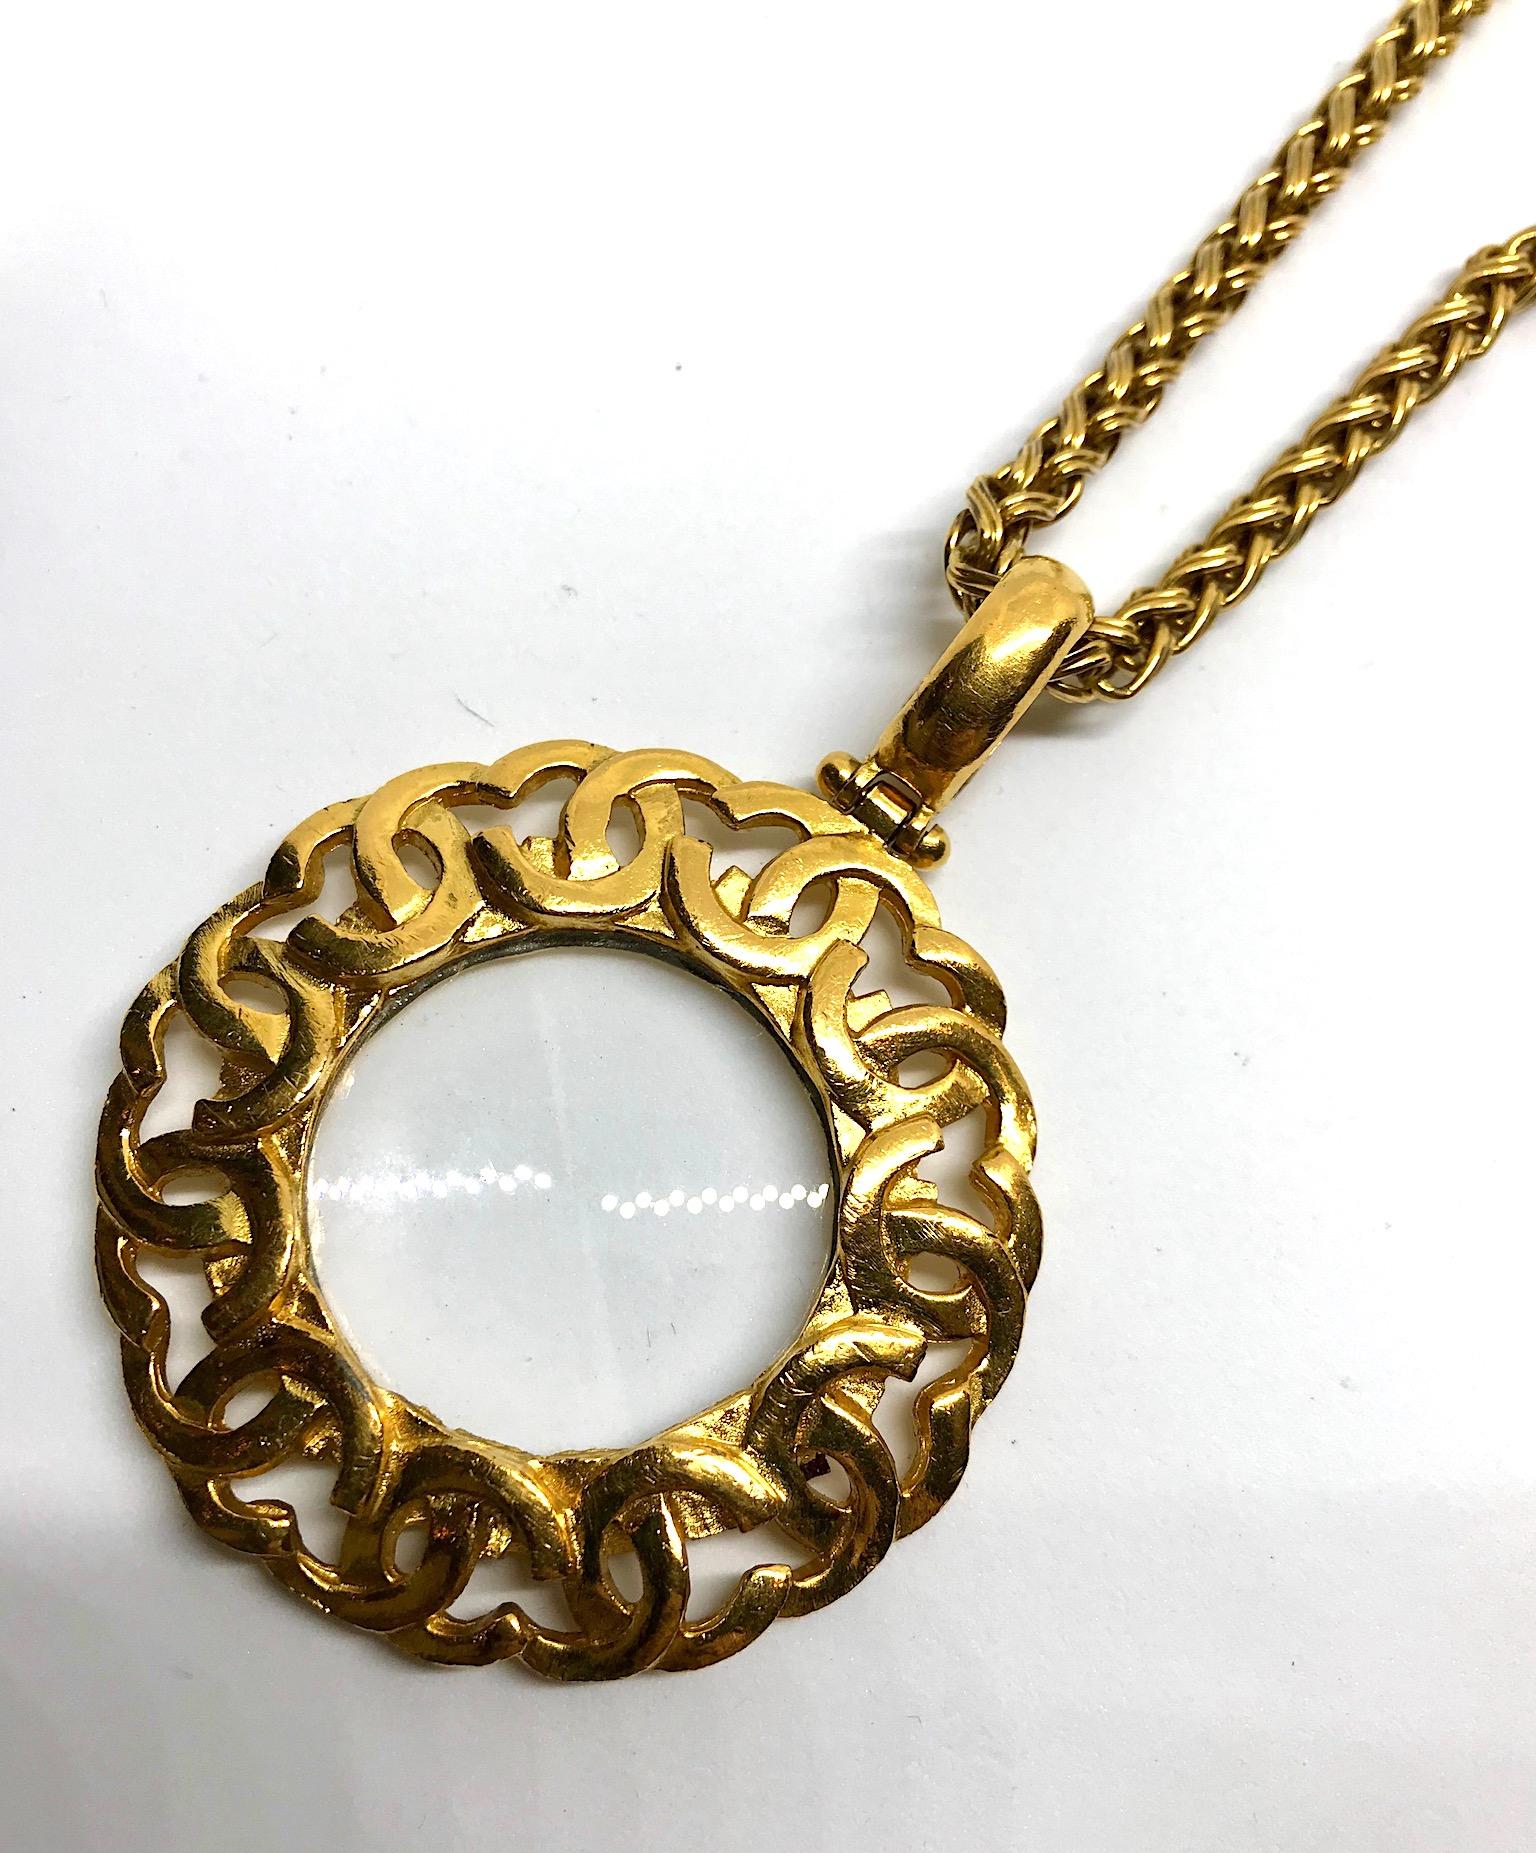 Chanel Magnifying Glass Pendant Necklace Autumn 1995 Collection 1